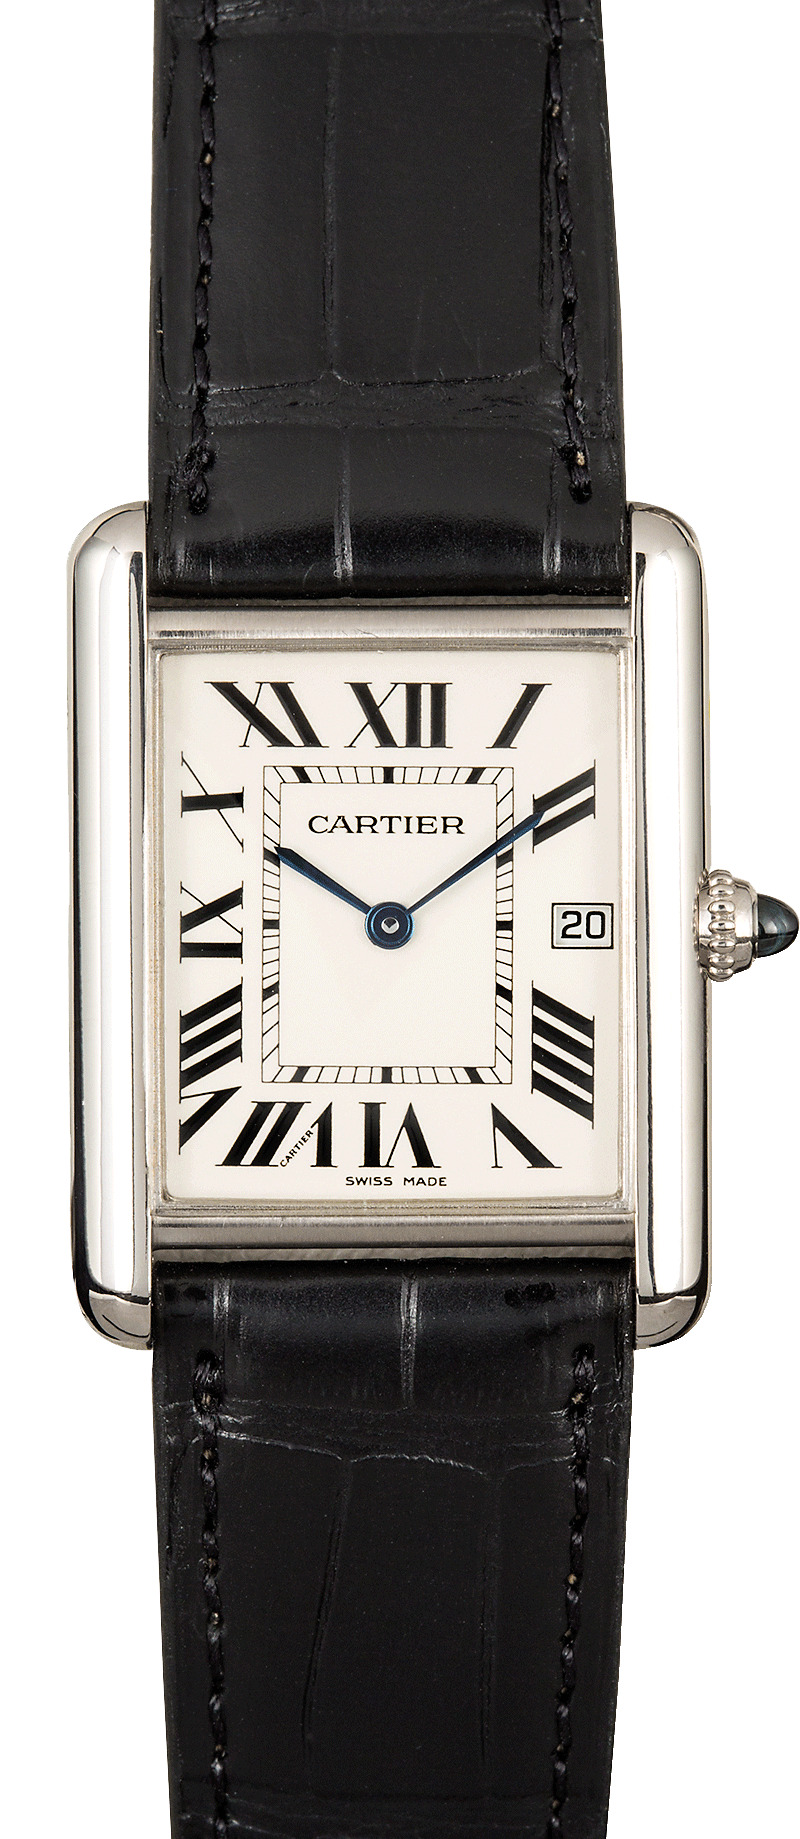 used mens cartier tank watch